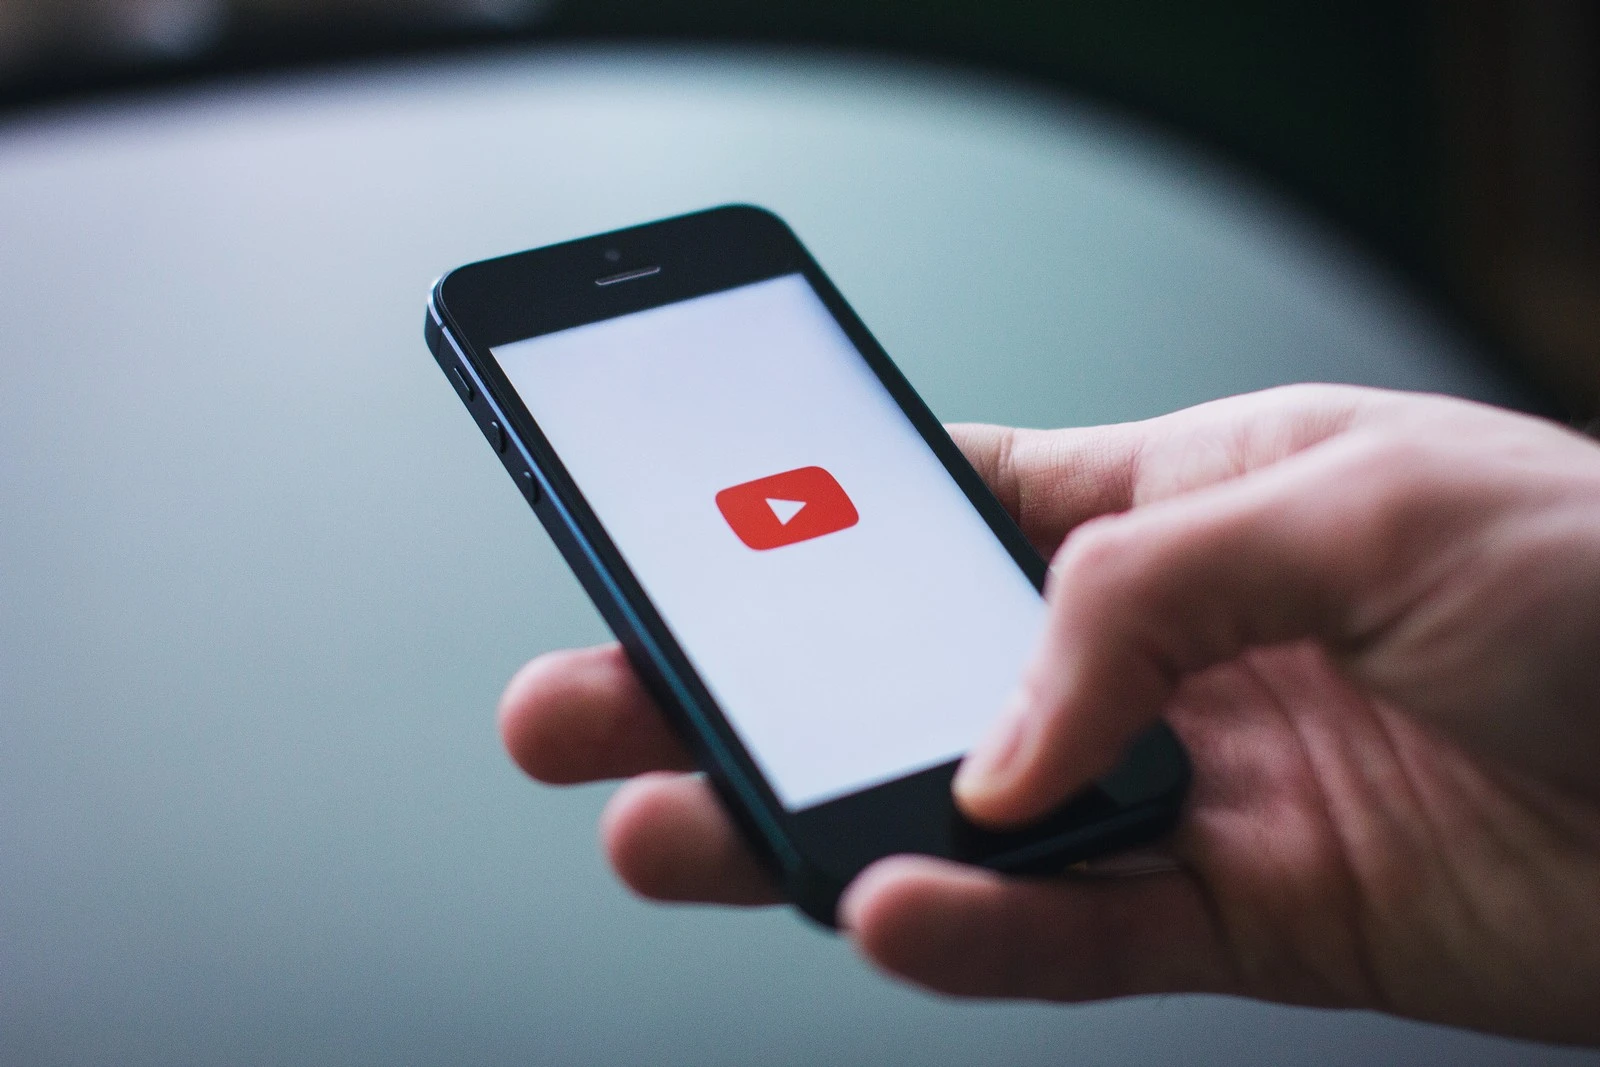 YouTube Adds New Features for Creators: Insights, Automation, and Live Control